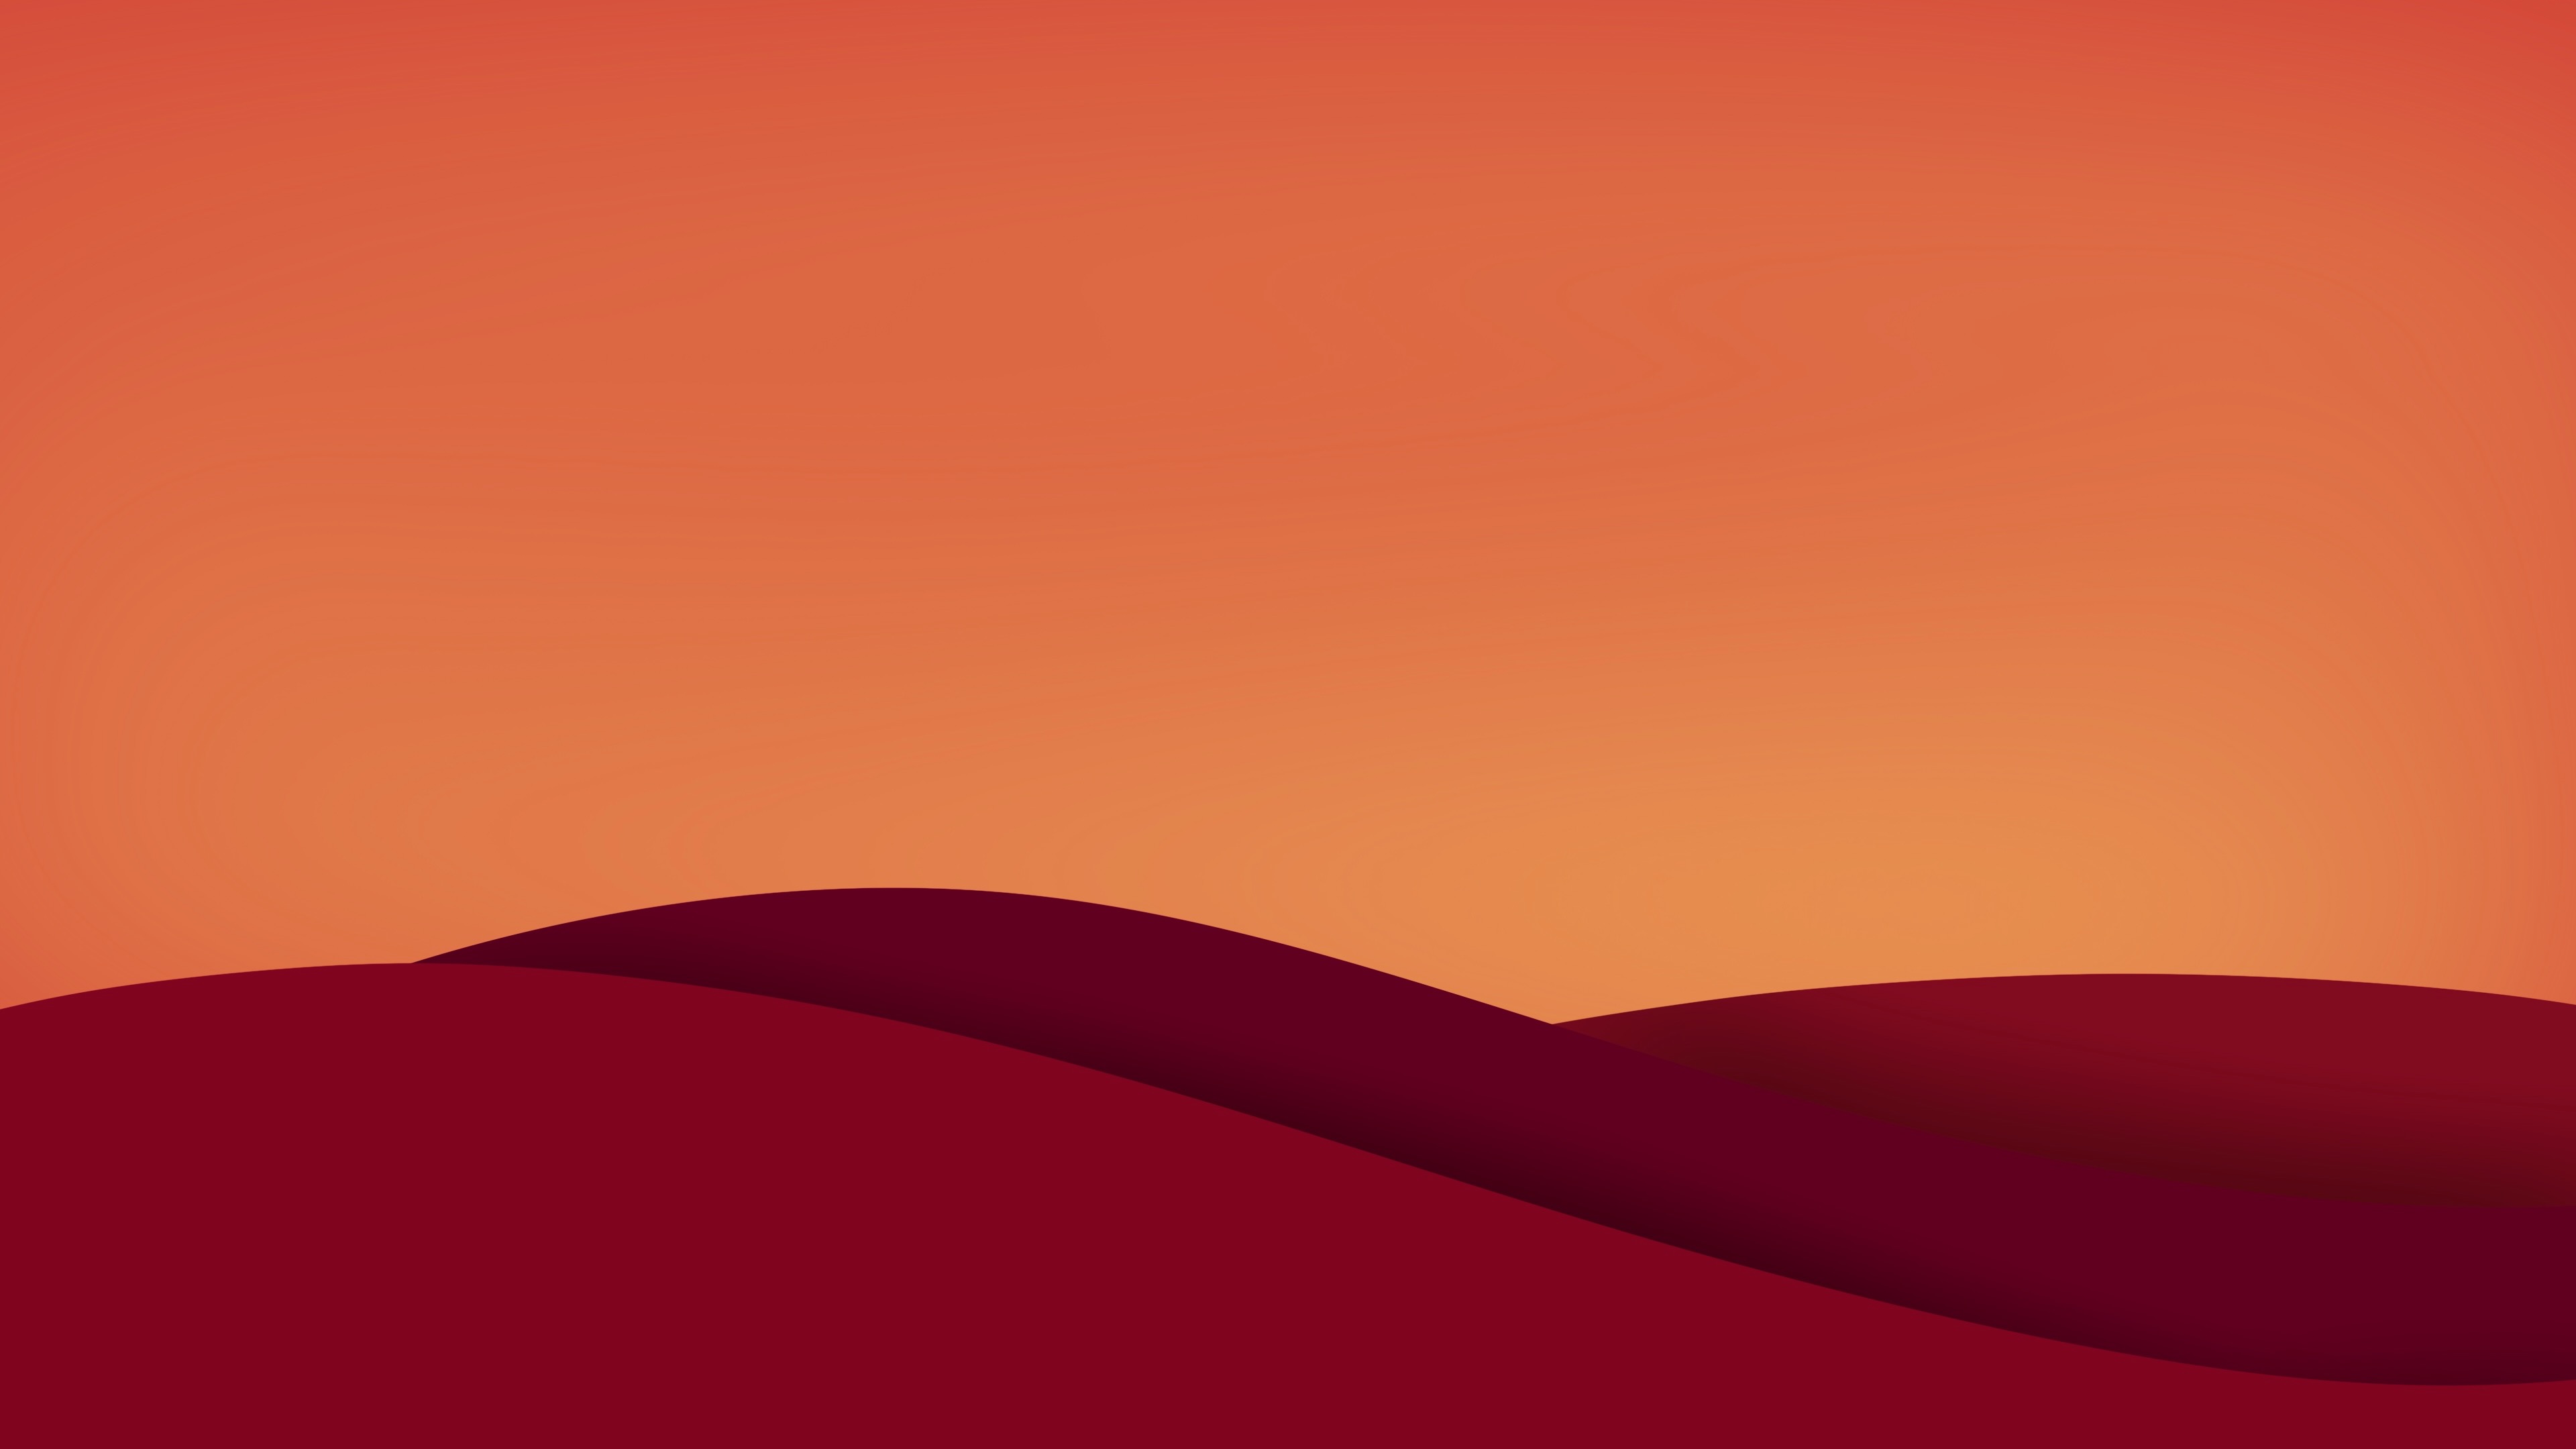 Minimalist Sunset In Hill Wallpapers